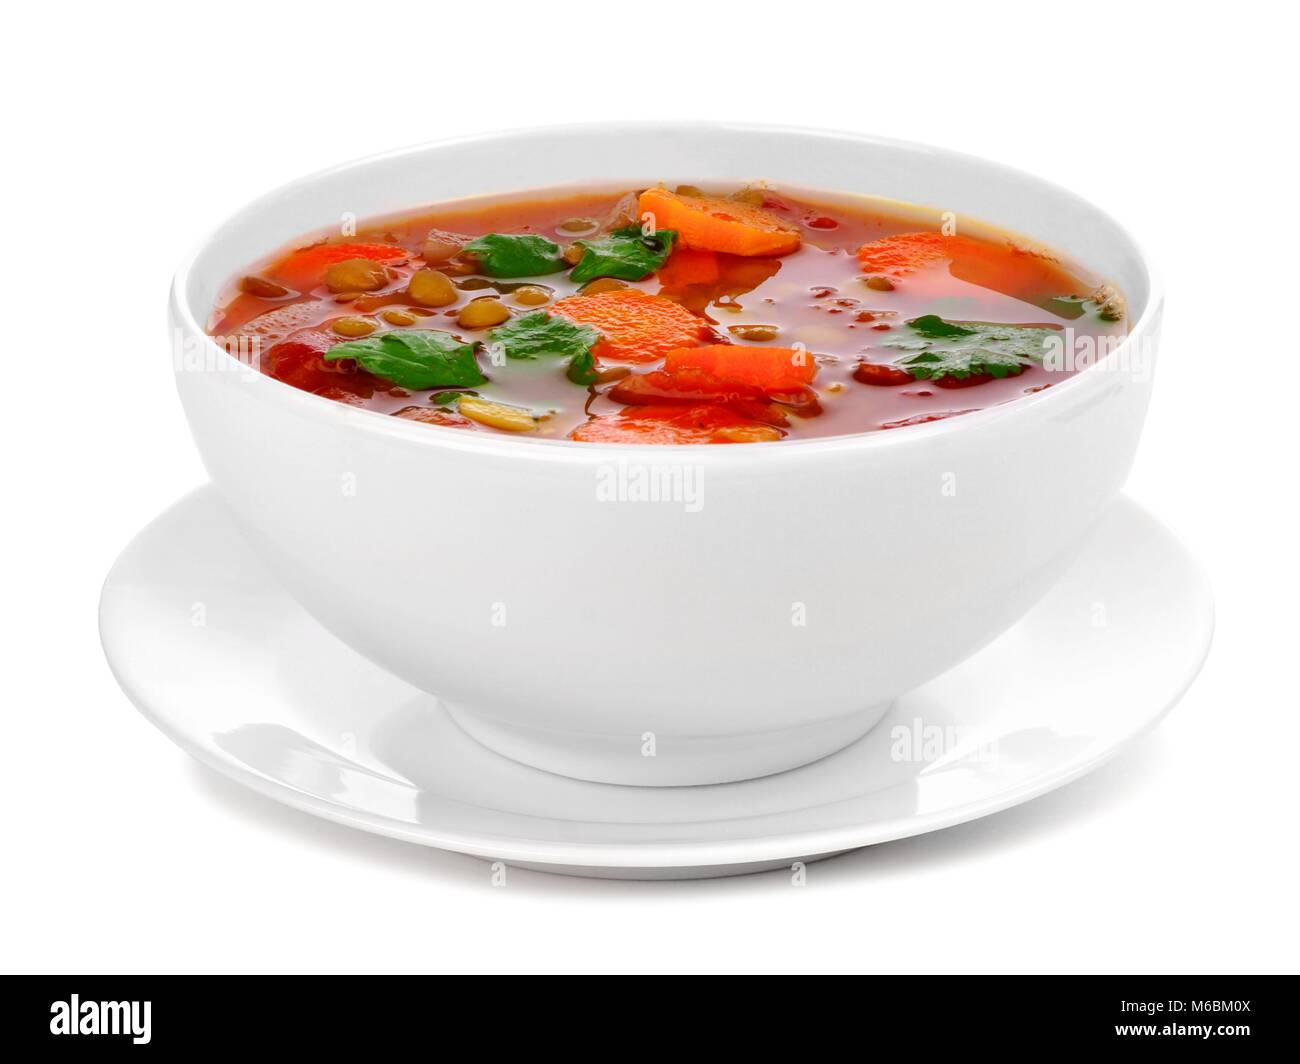 Homemade tomato, lentil soup in a white bowl with saucer. Side view isolated on a white background. Stock Photo